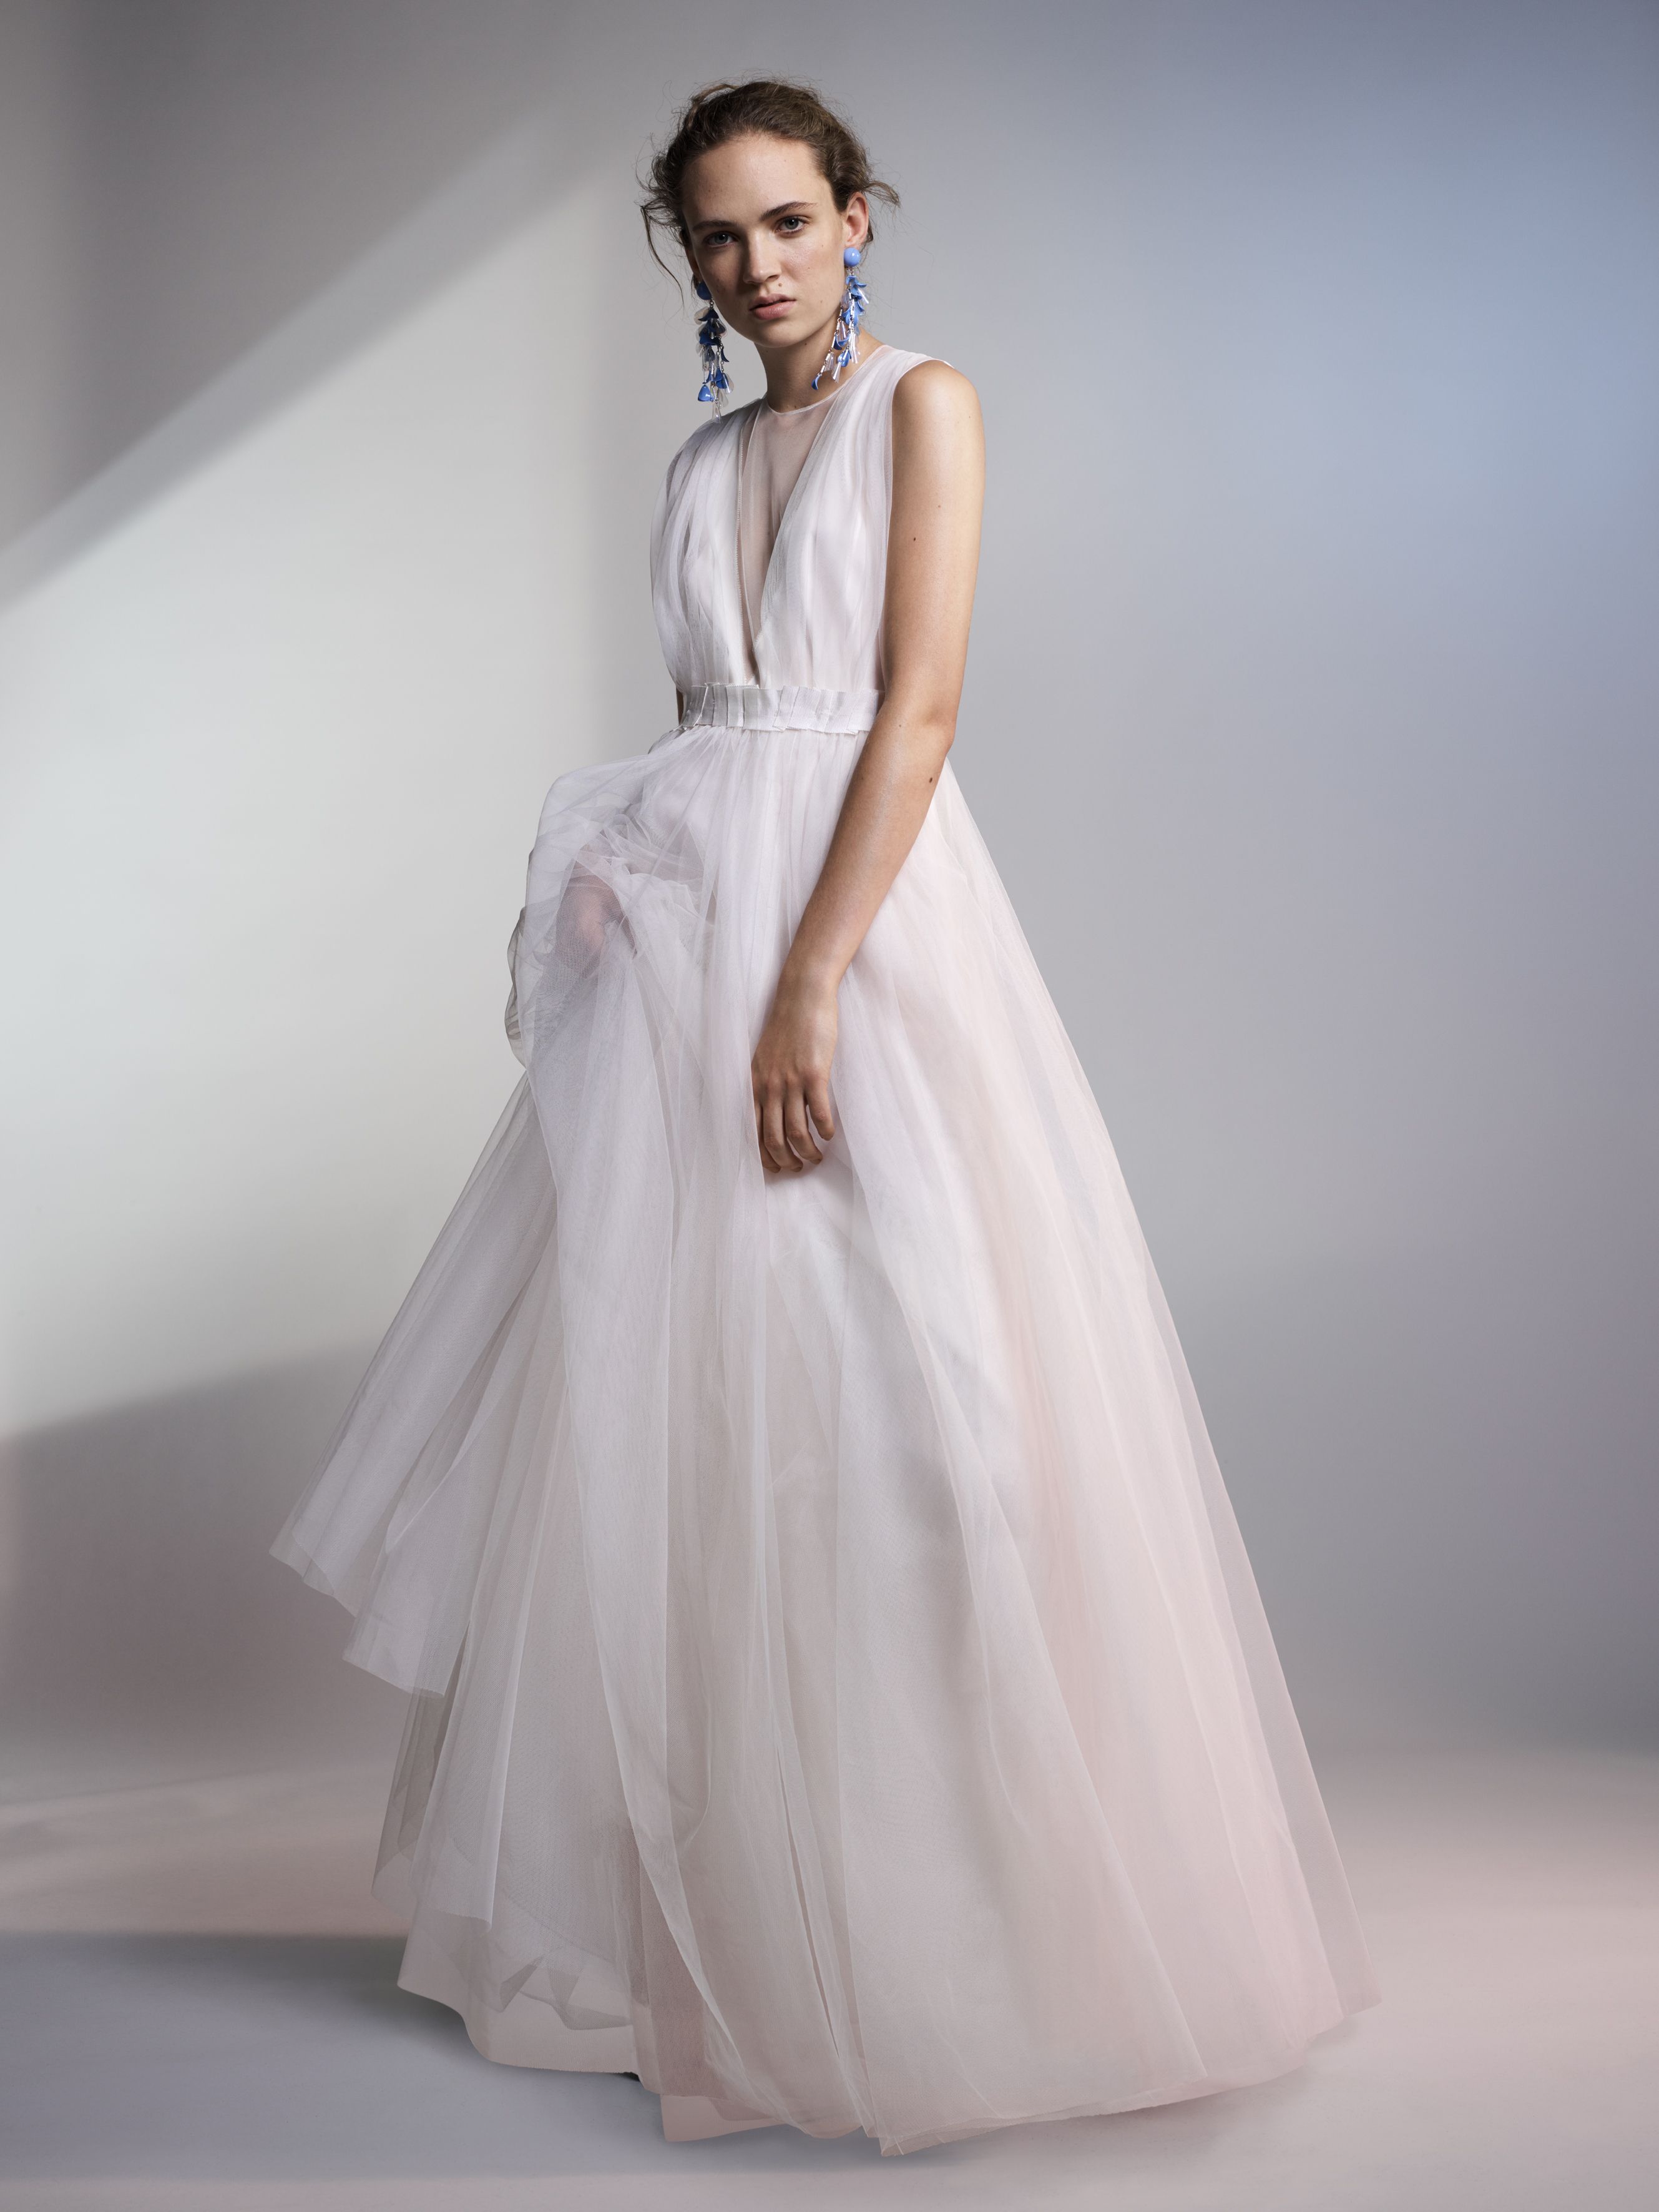 Hu0026M's Conscious Exclusive collection includes a stunning wedding dress